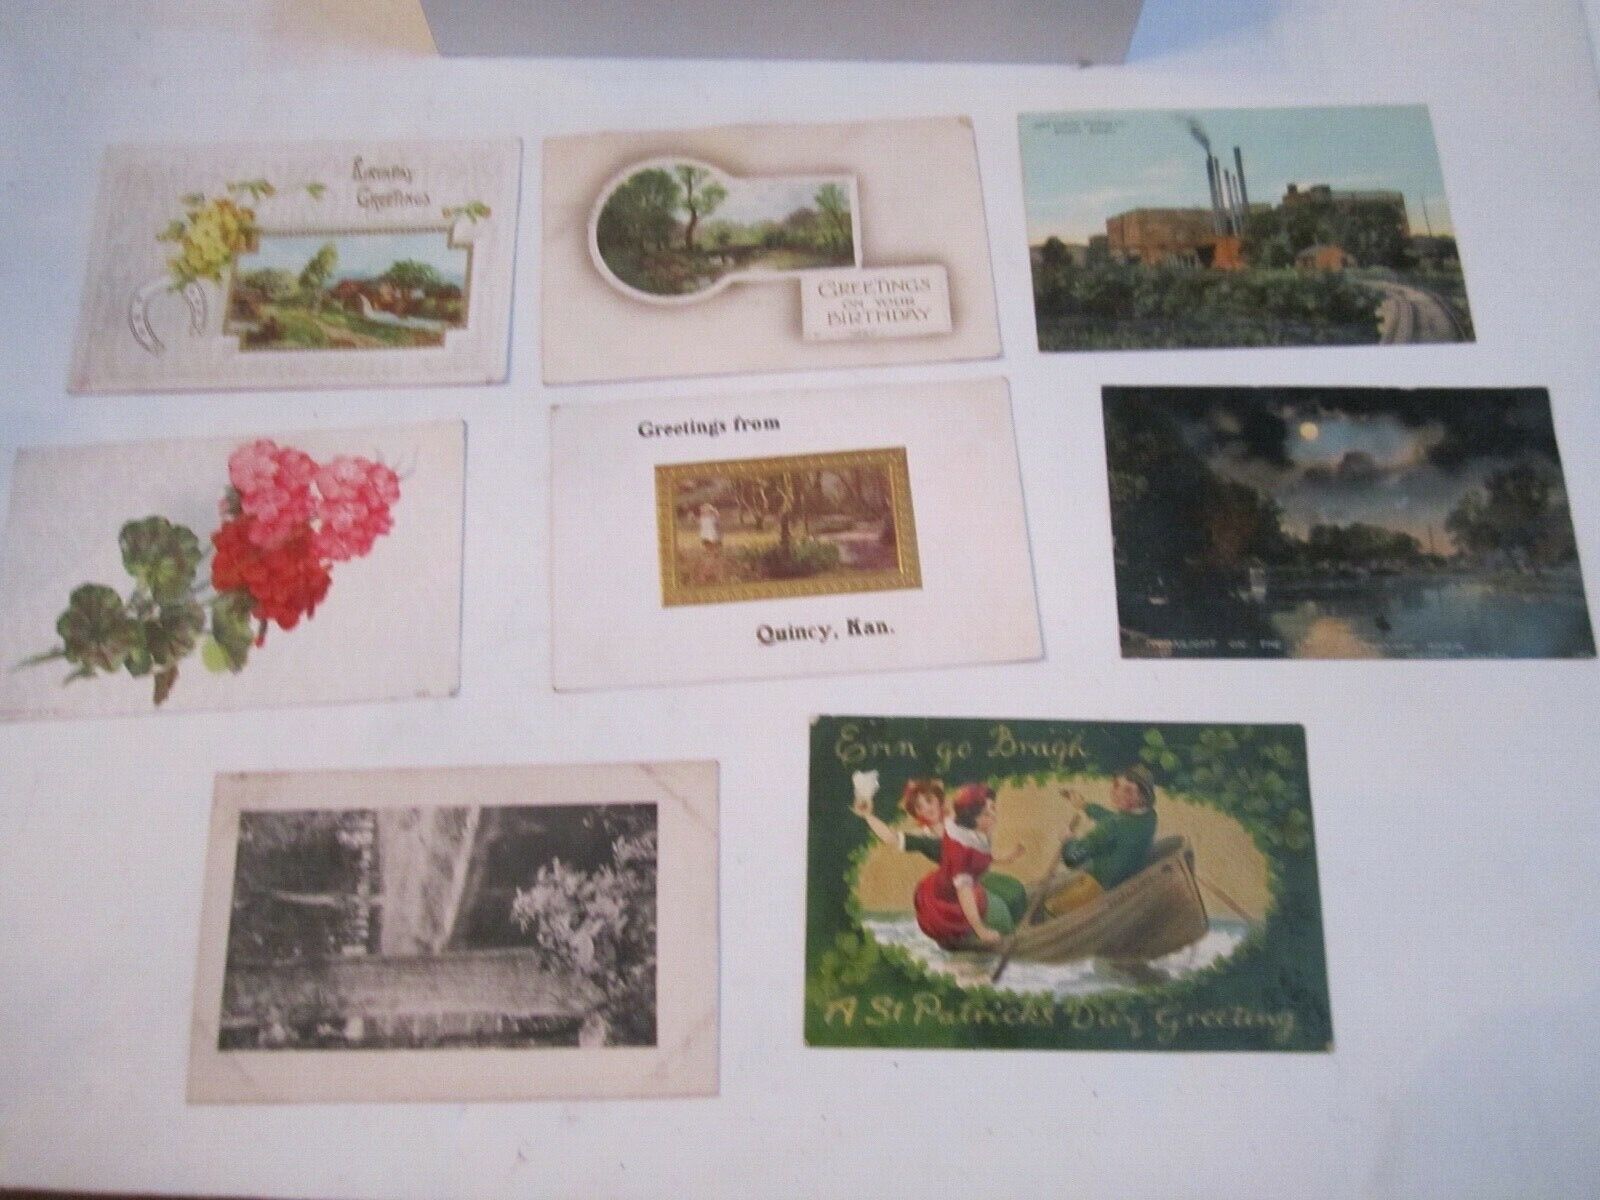 48 ANTIQUE POSTCARDS FROM 1908 - 1912 - UNSEARCHED - FIND YOUR TREASURES 5 AMA